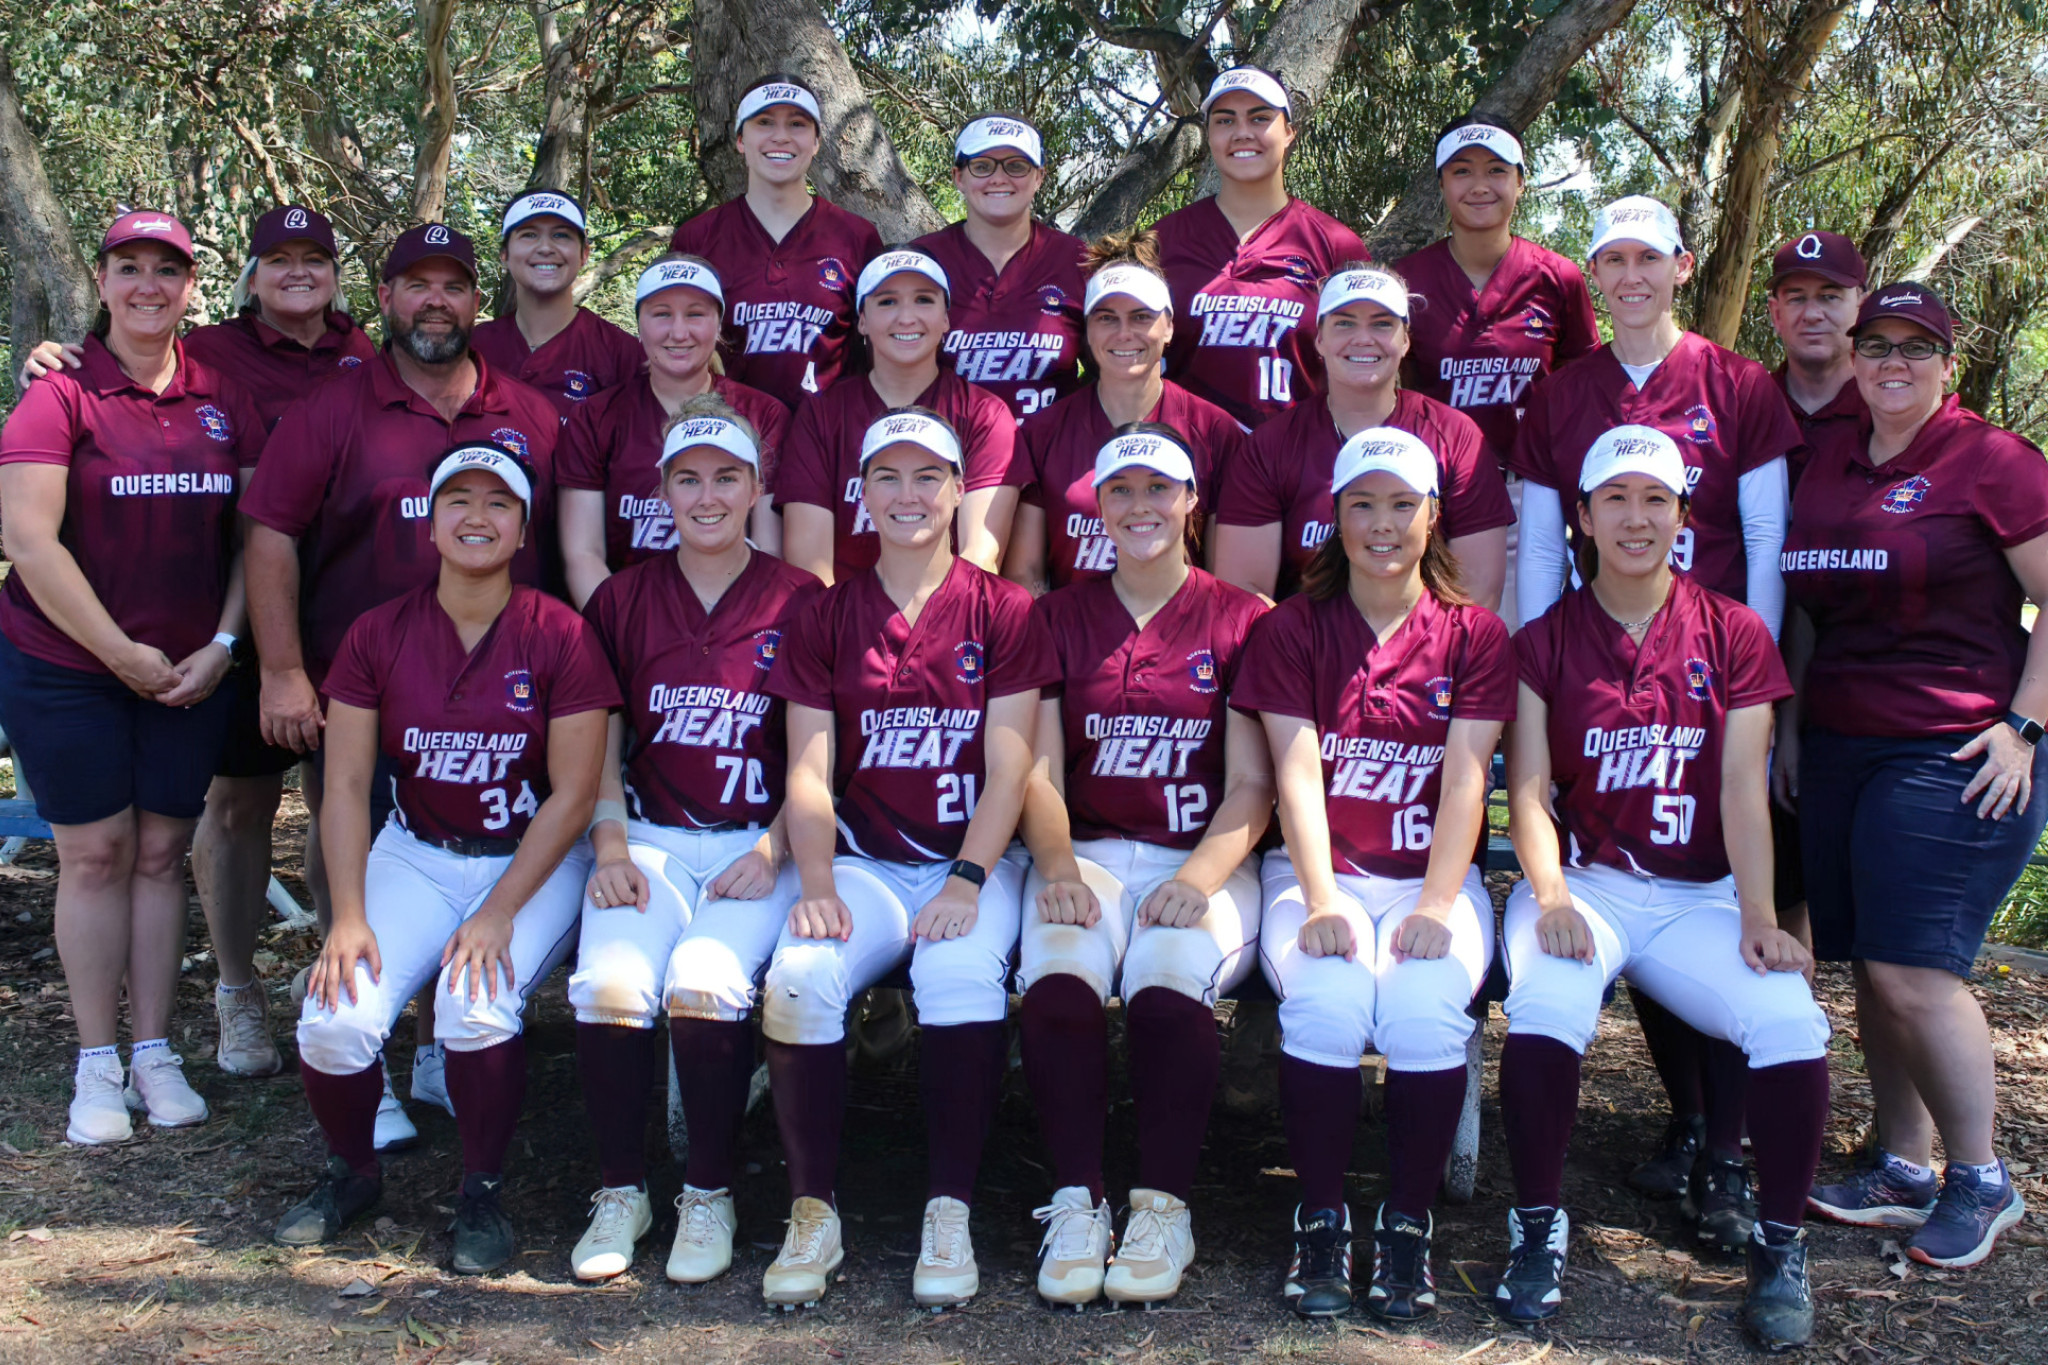 Caboolture softballer Natasha Szathmary(far left) with the QLD Heat open womens softball team which placed runner-up for the second year in the Gilley’s Shield. Photo credit Lesley Mceachern.